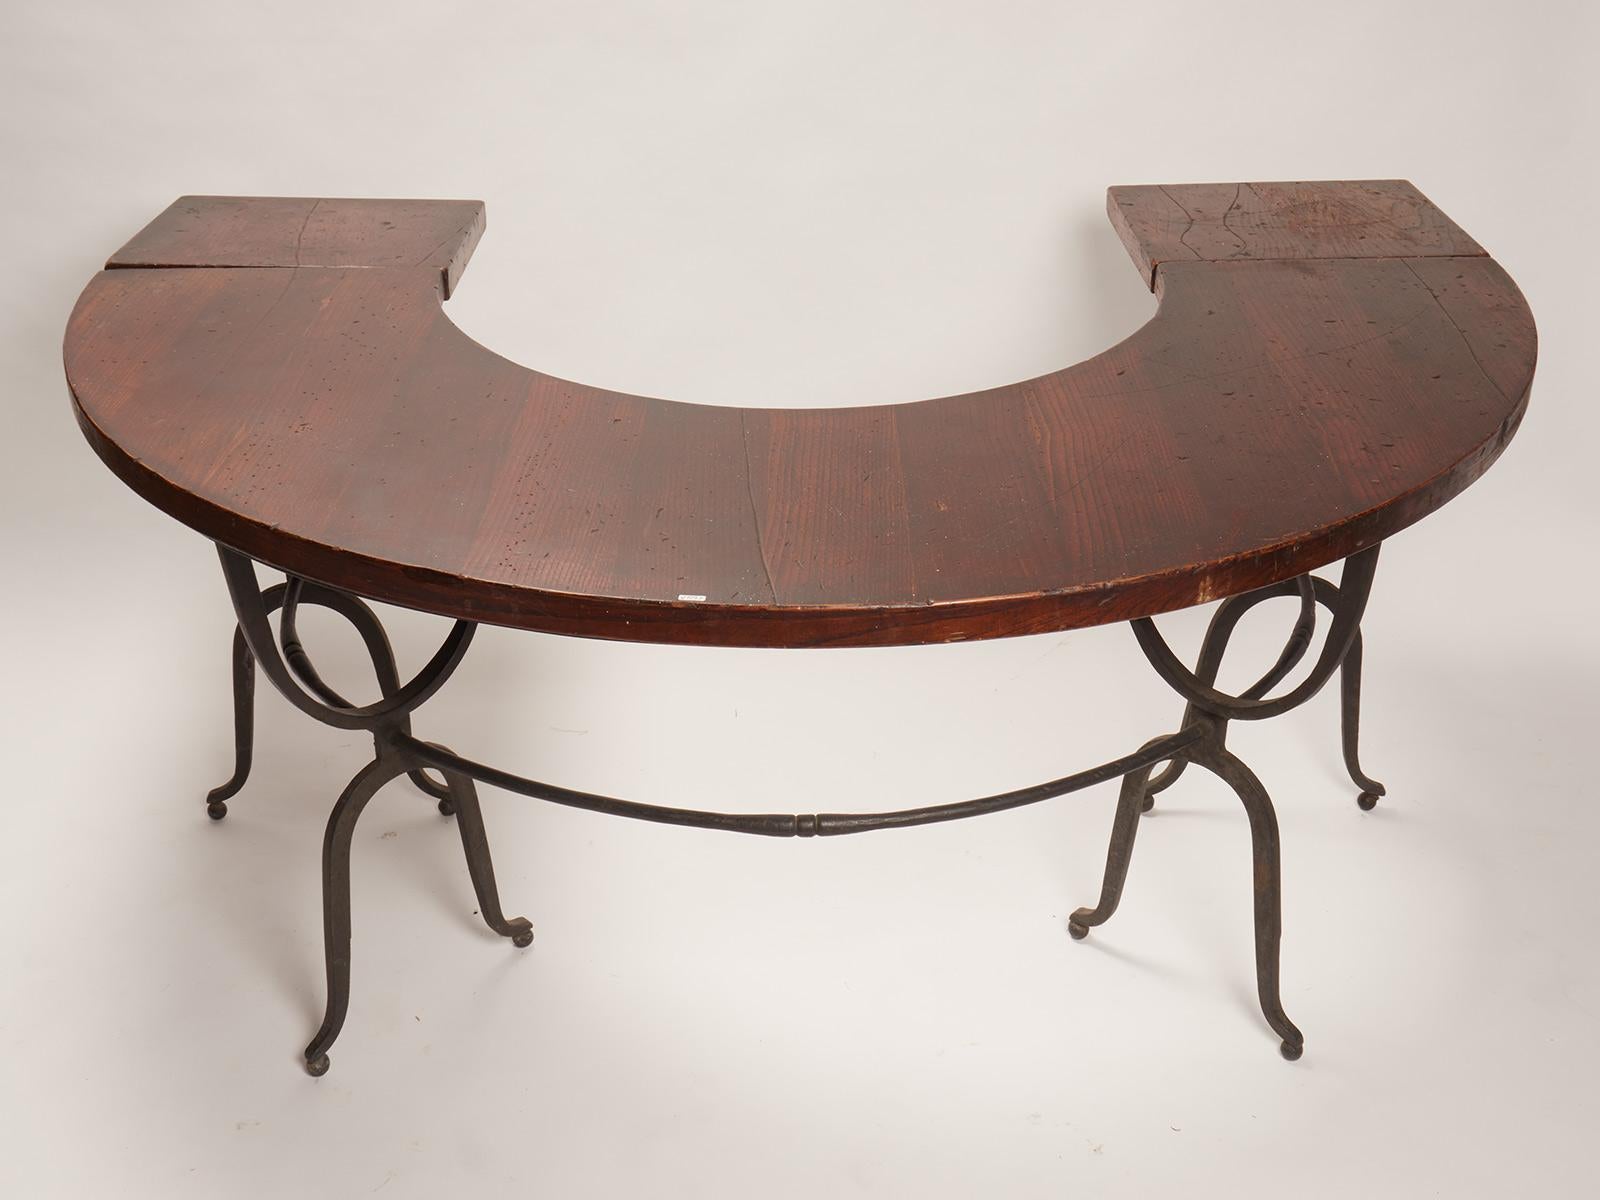 This unusual hunt table has cast iron arch shaped refined legs in an intrigued pattern and semi-circle shaped table, with a solid Teak wood shelf. Used for wine tasting. It has two extensions, one each side. United States, circa1900.